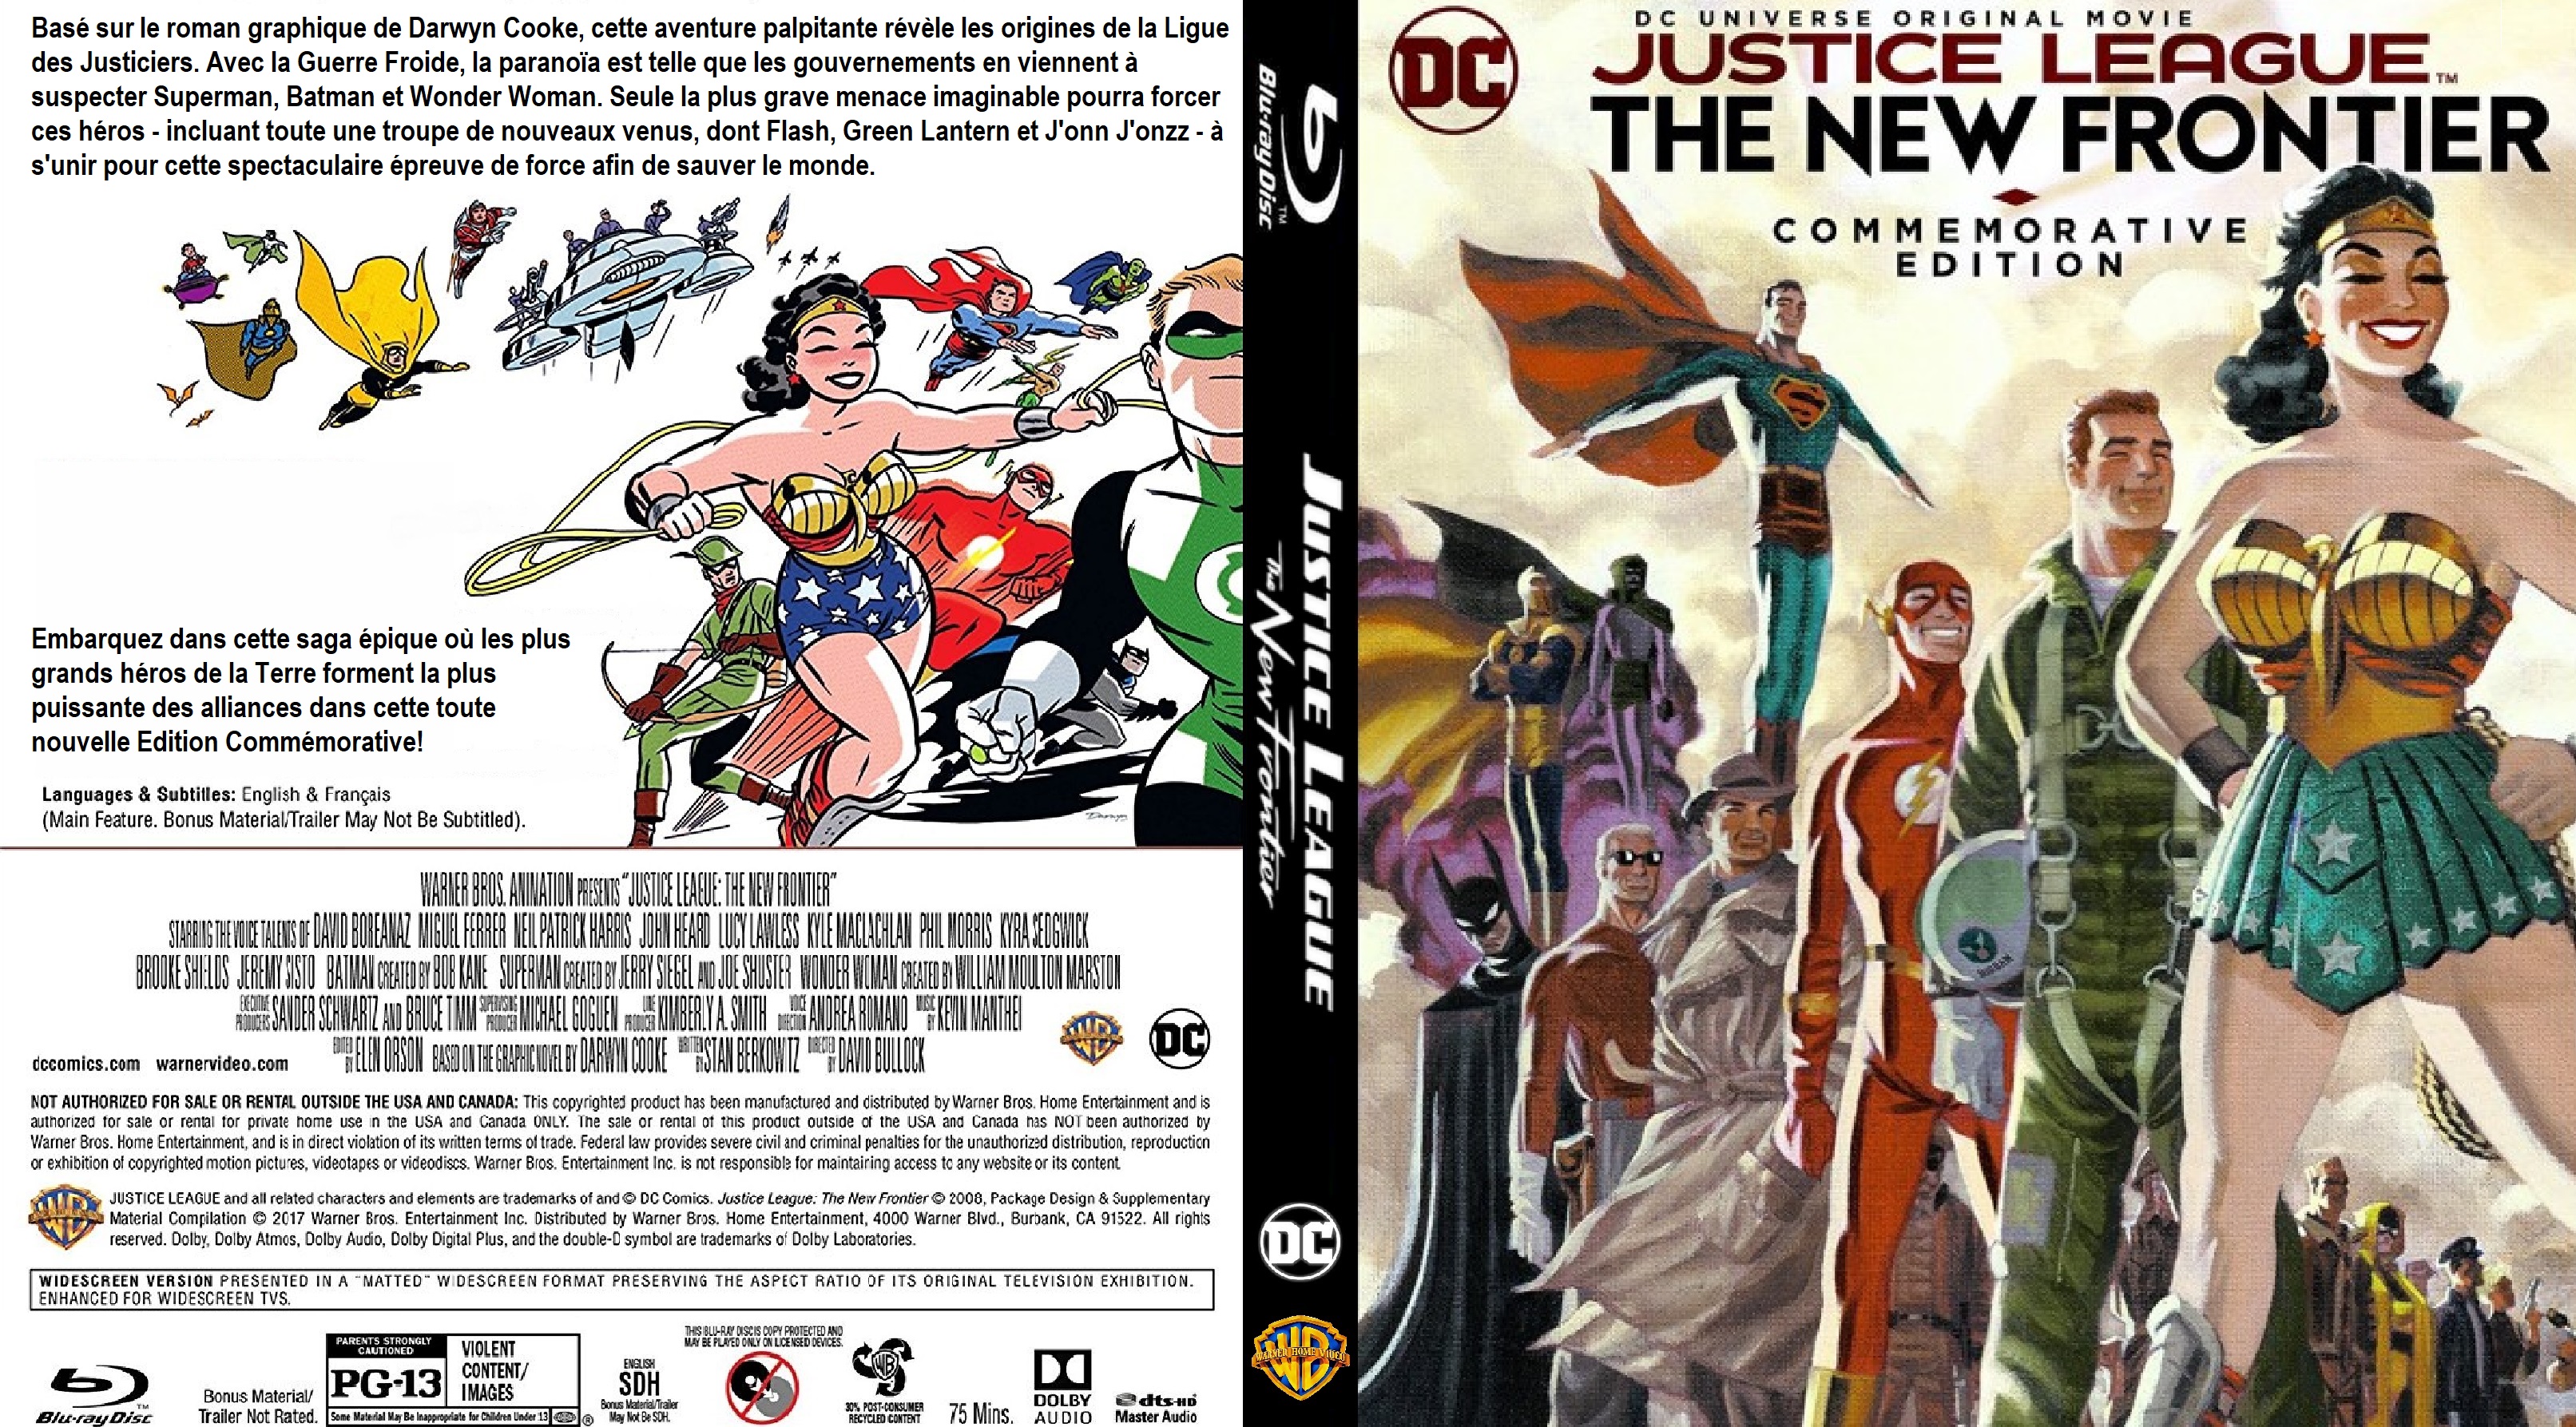 Jaquette DVD Justice League The New Frontier custom (BLU-RAY)